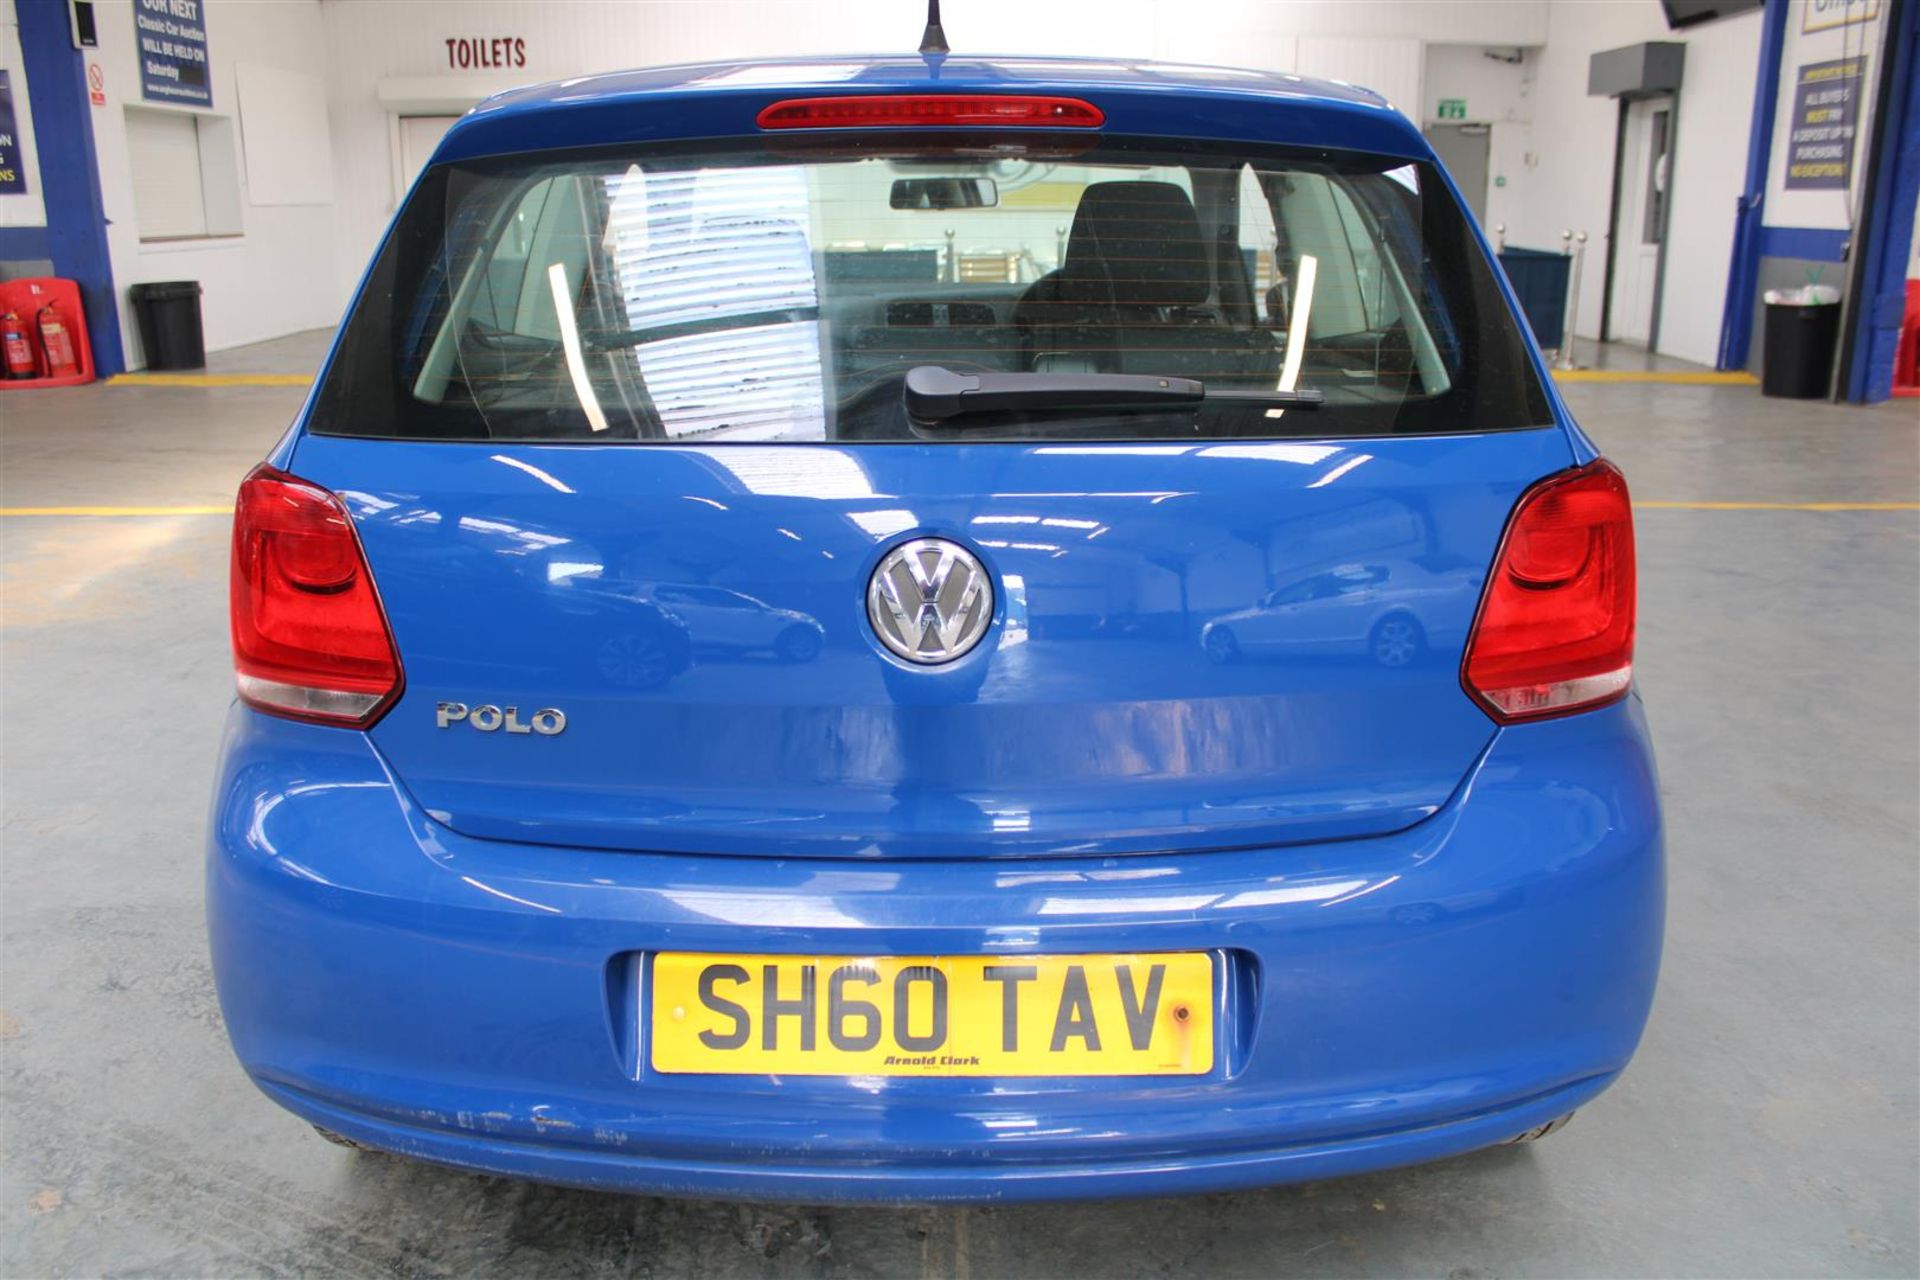 60 10 VW Polo S 60 - Image 25 of 27